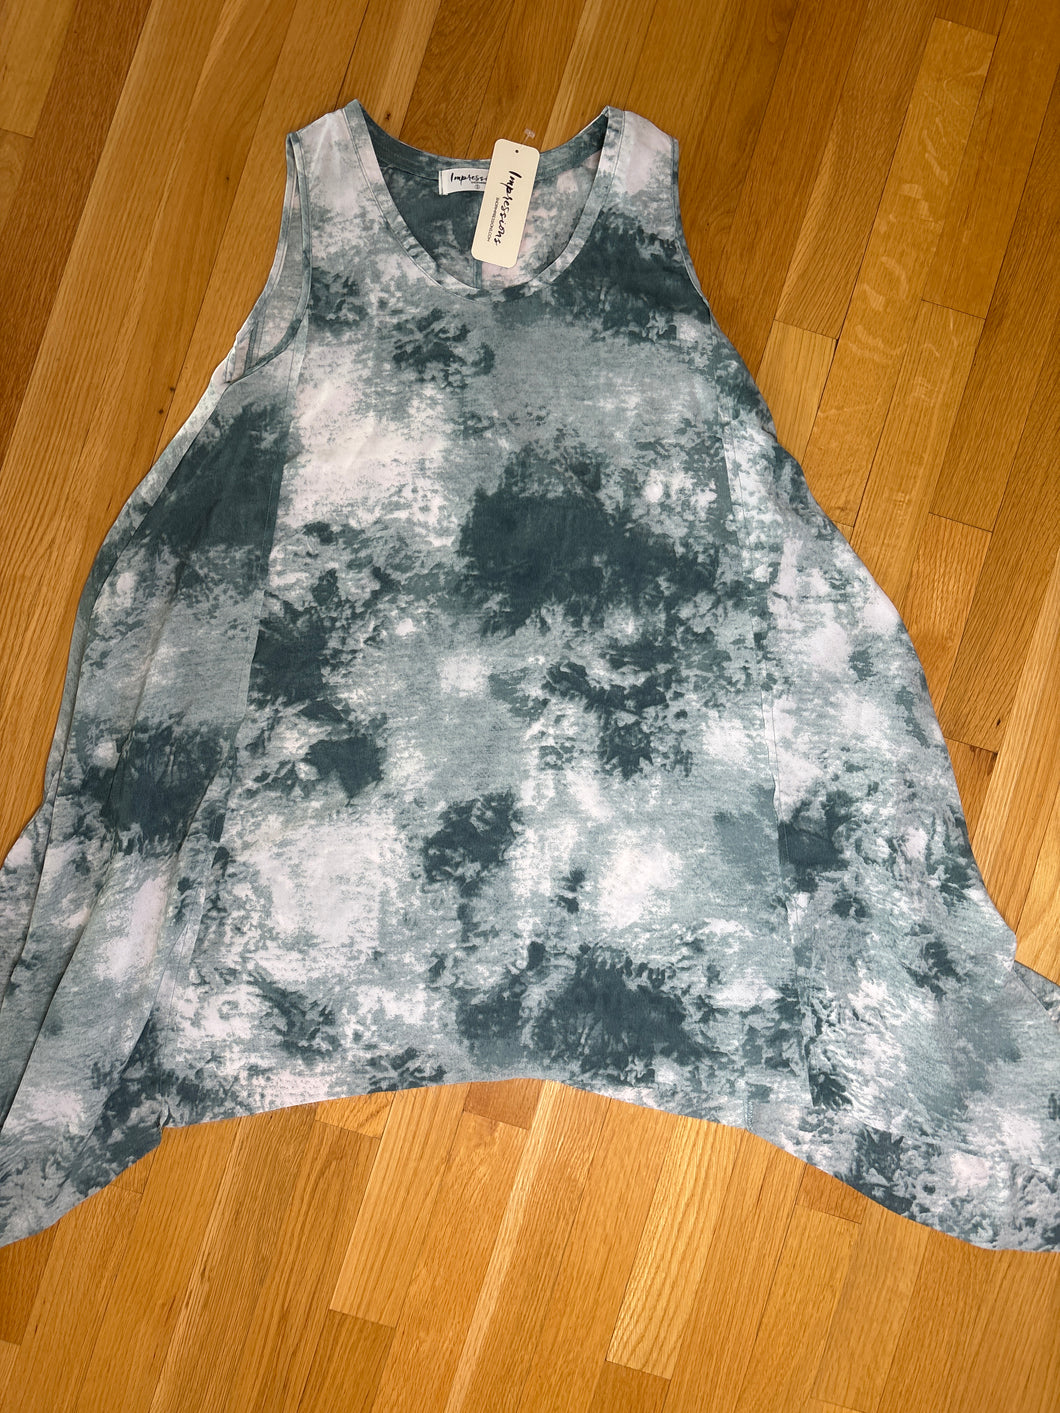 Women’s tank top or swim cover up NWT Adult Small